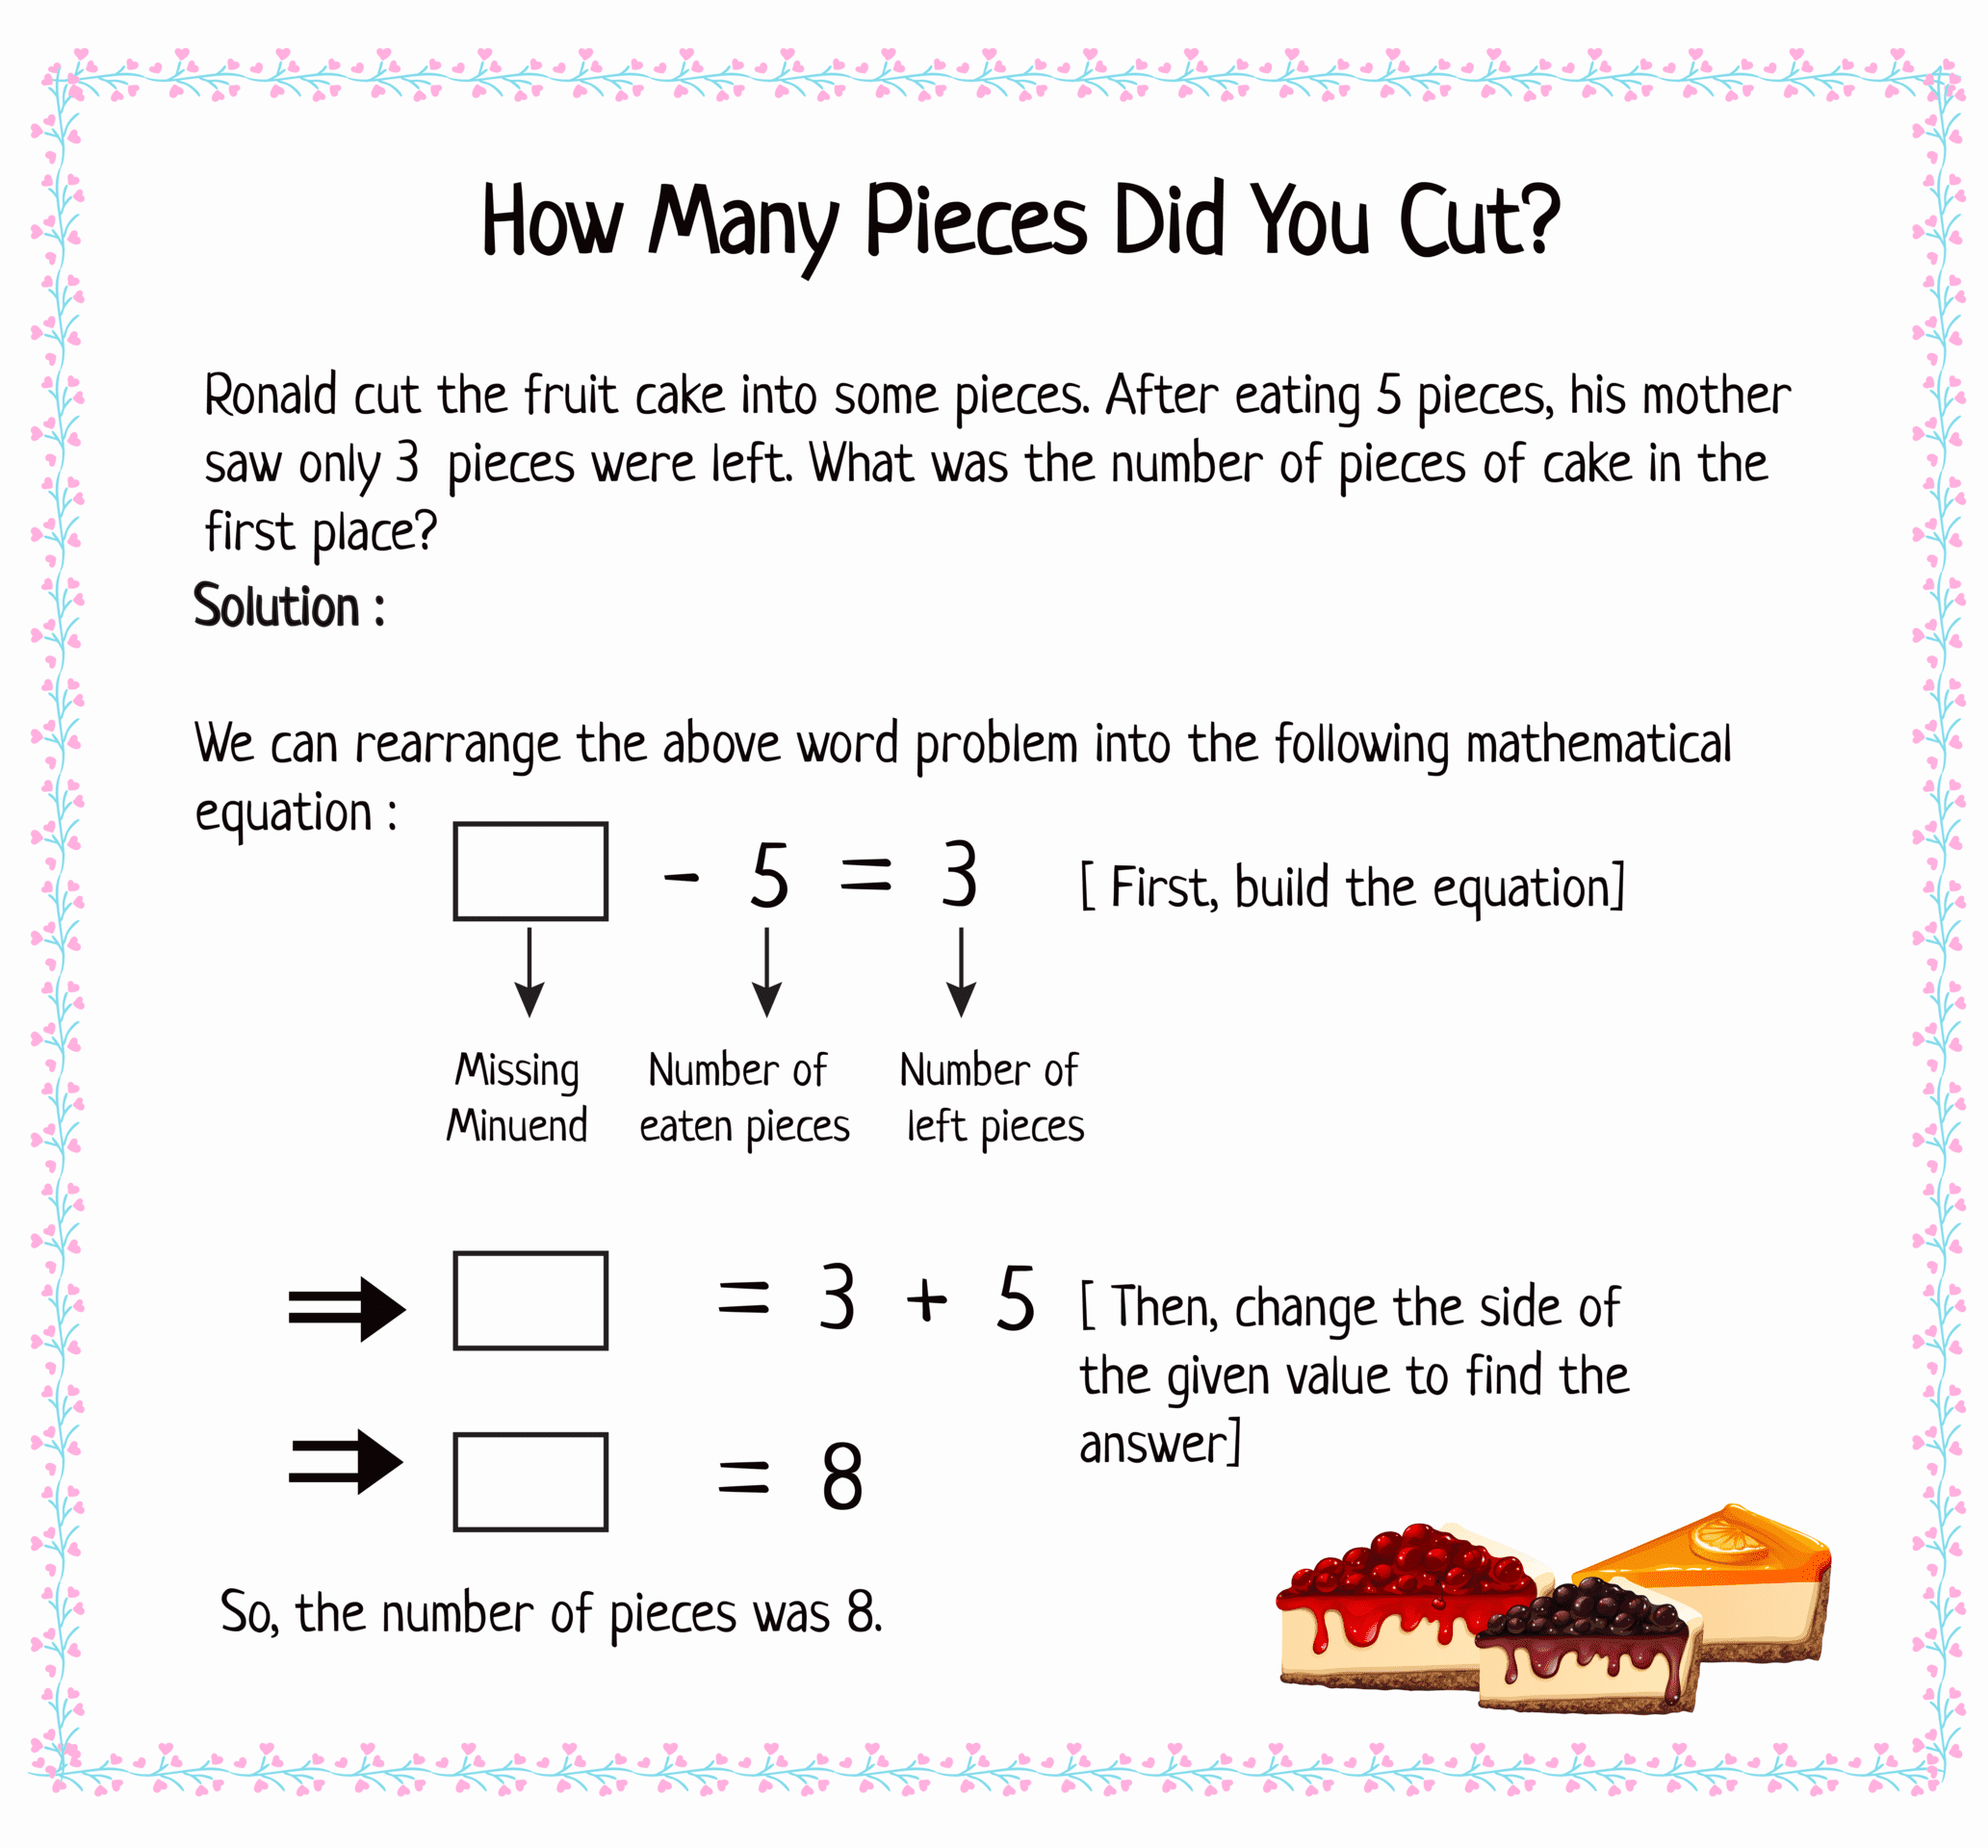 Determining Cake Pieces by Utlilizing Missing Minuend.